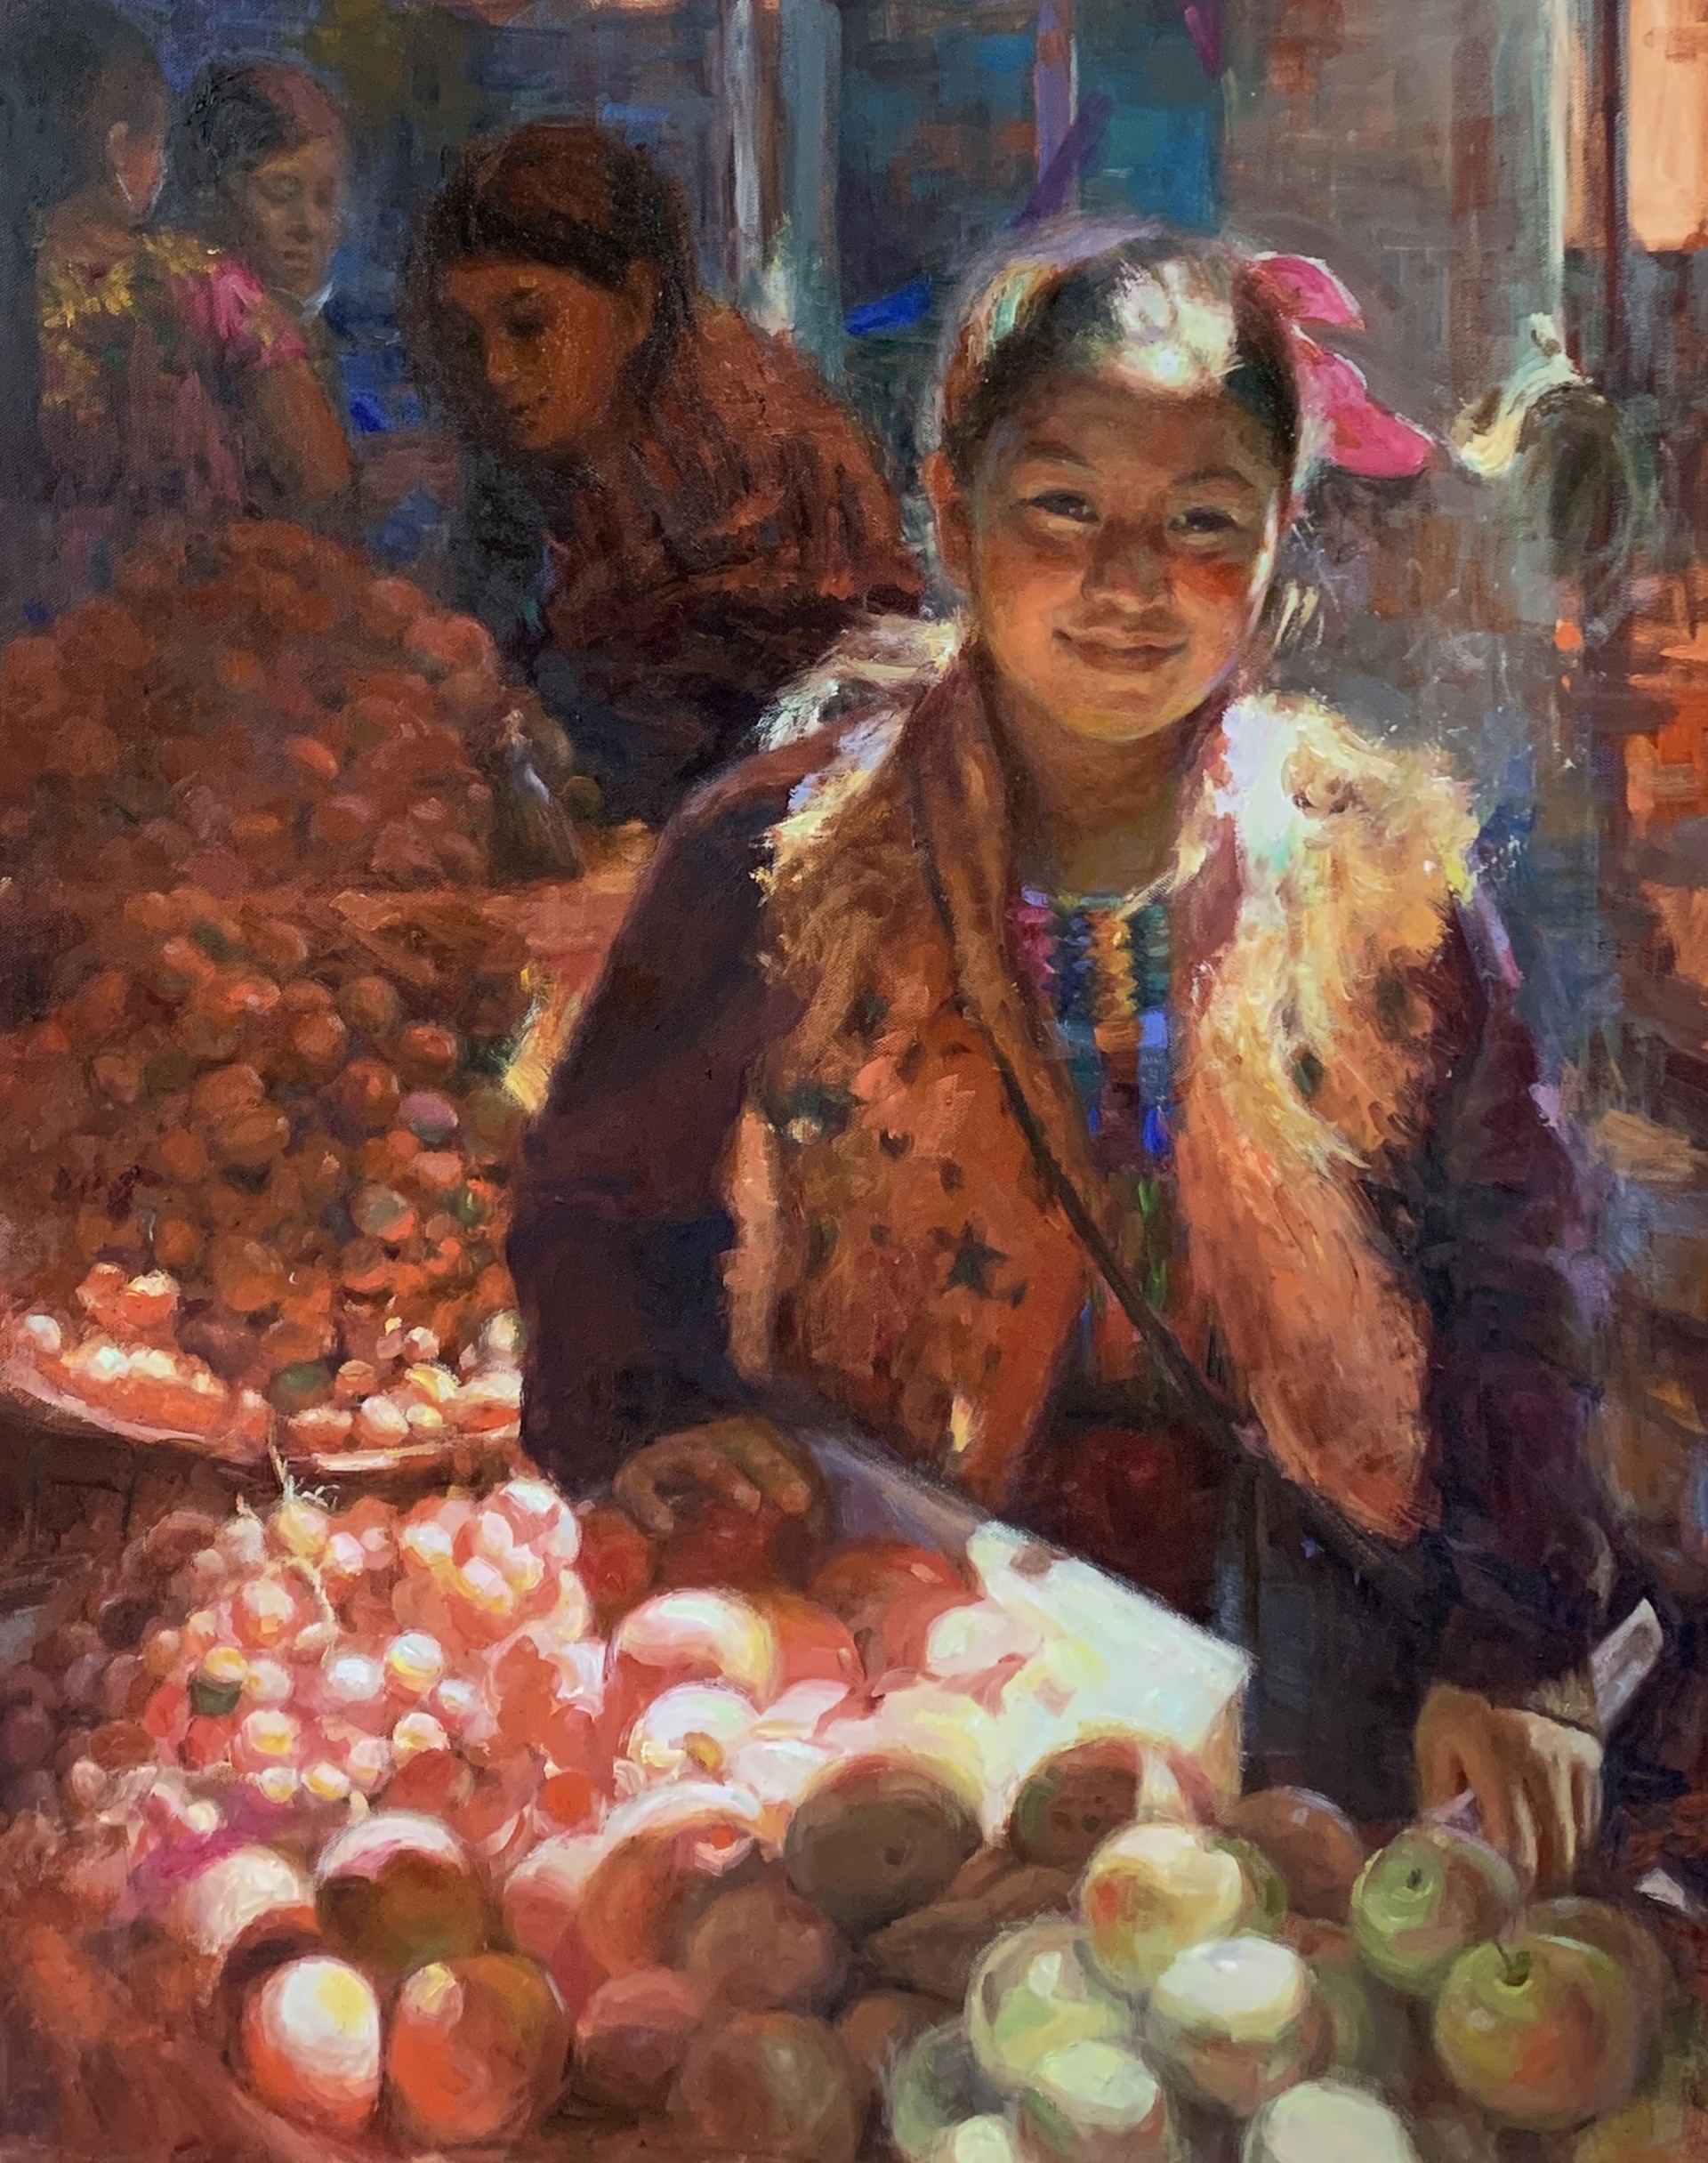 Young Girl at the Market - AWARD WINNER - AWARD OF MERIT by Jing Zhao